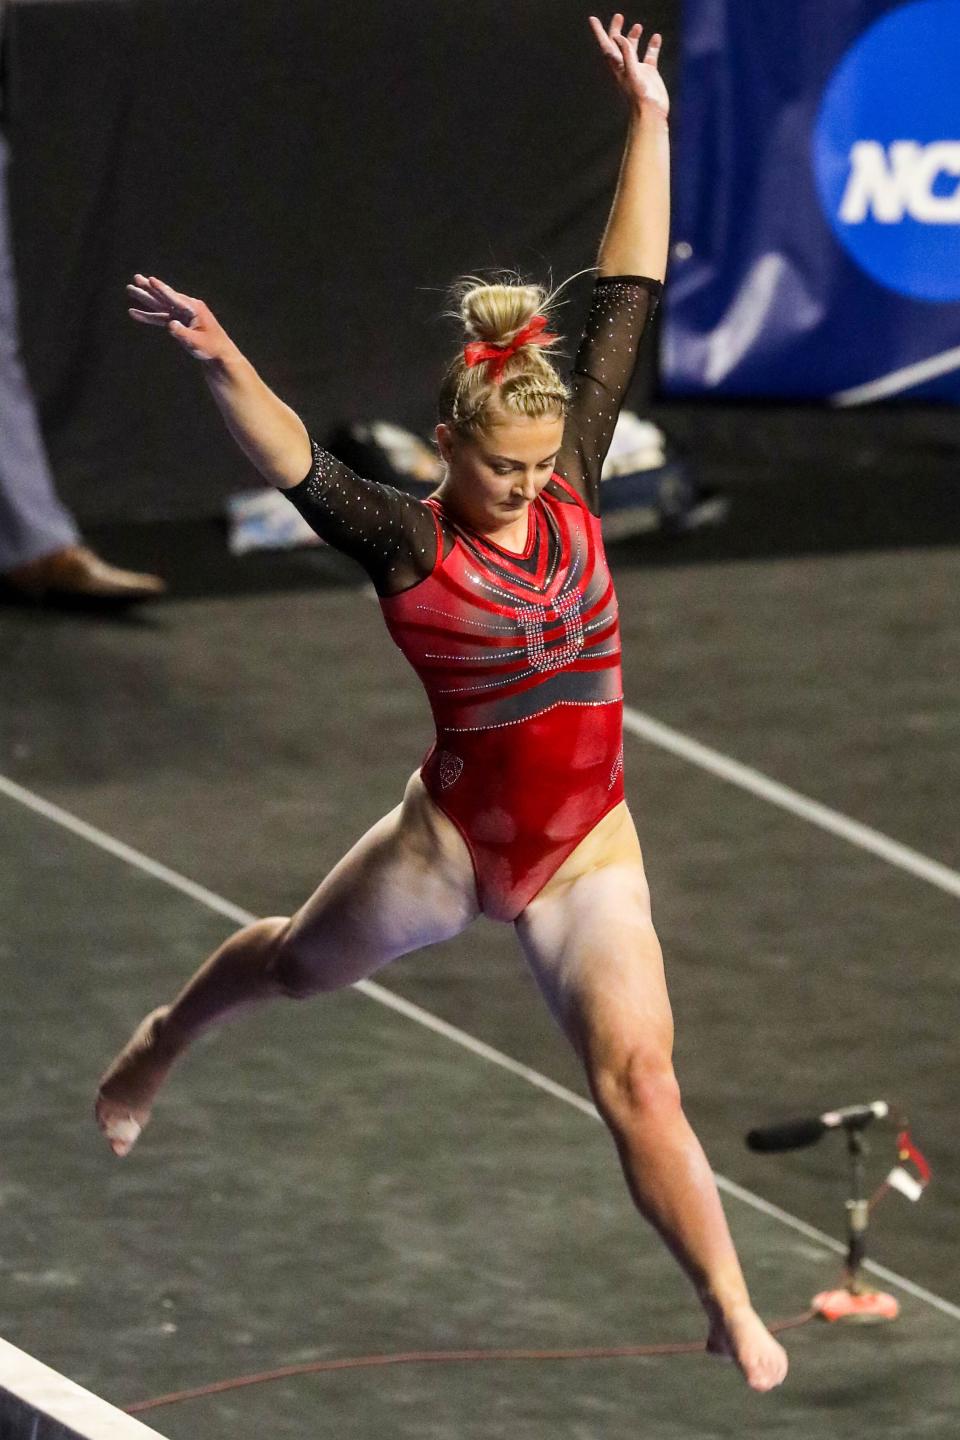 Utah Utes gymnast Lucy Stanhope performs on the beam during the NCAA regional final round at the Maverik Center on Saturday, April 3, 2021. The Utes are moving on to the next round. | Annie Barker, Deseret News